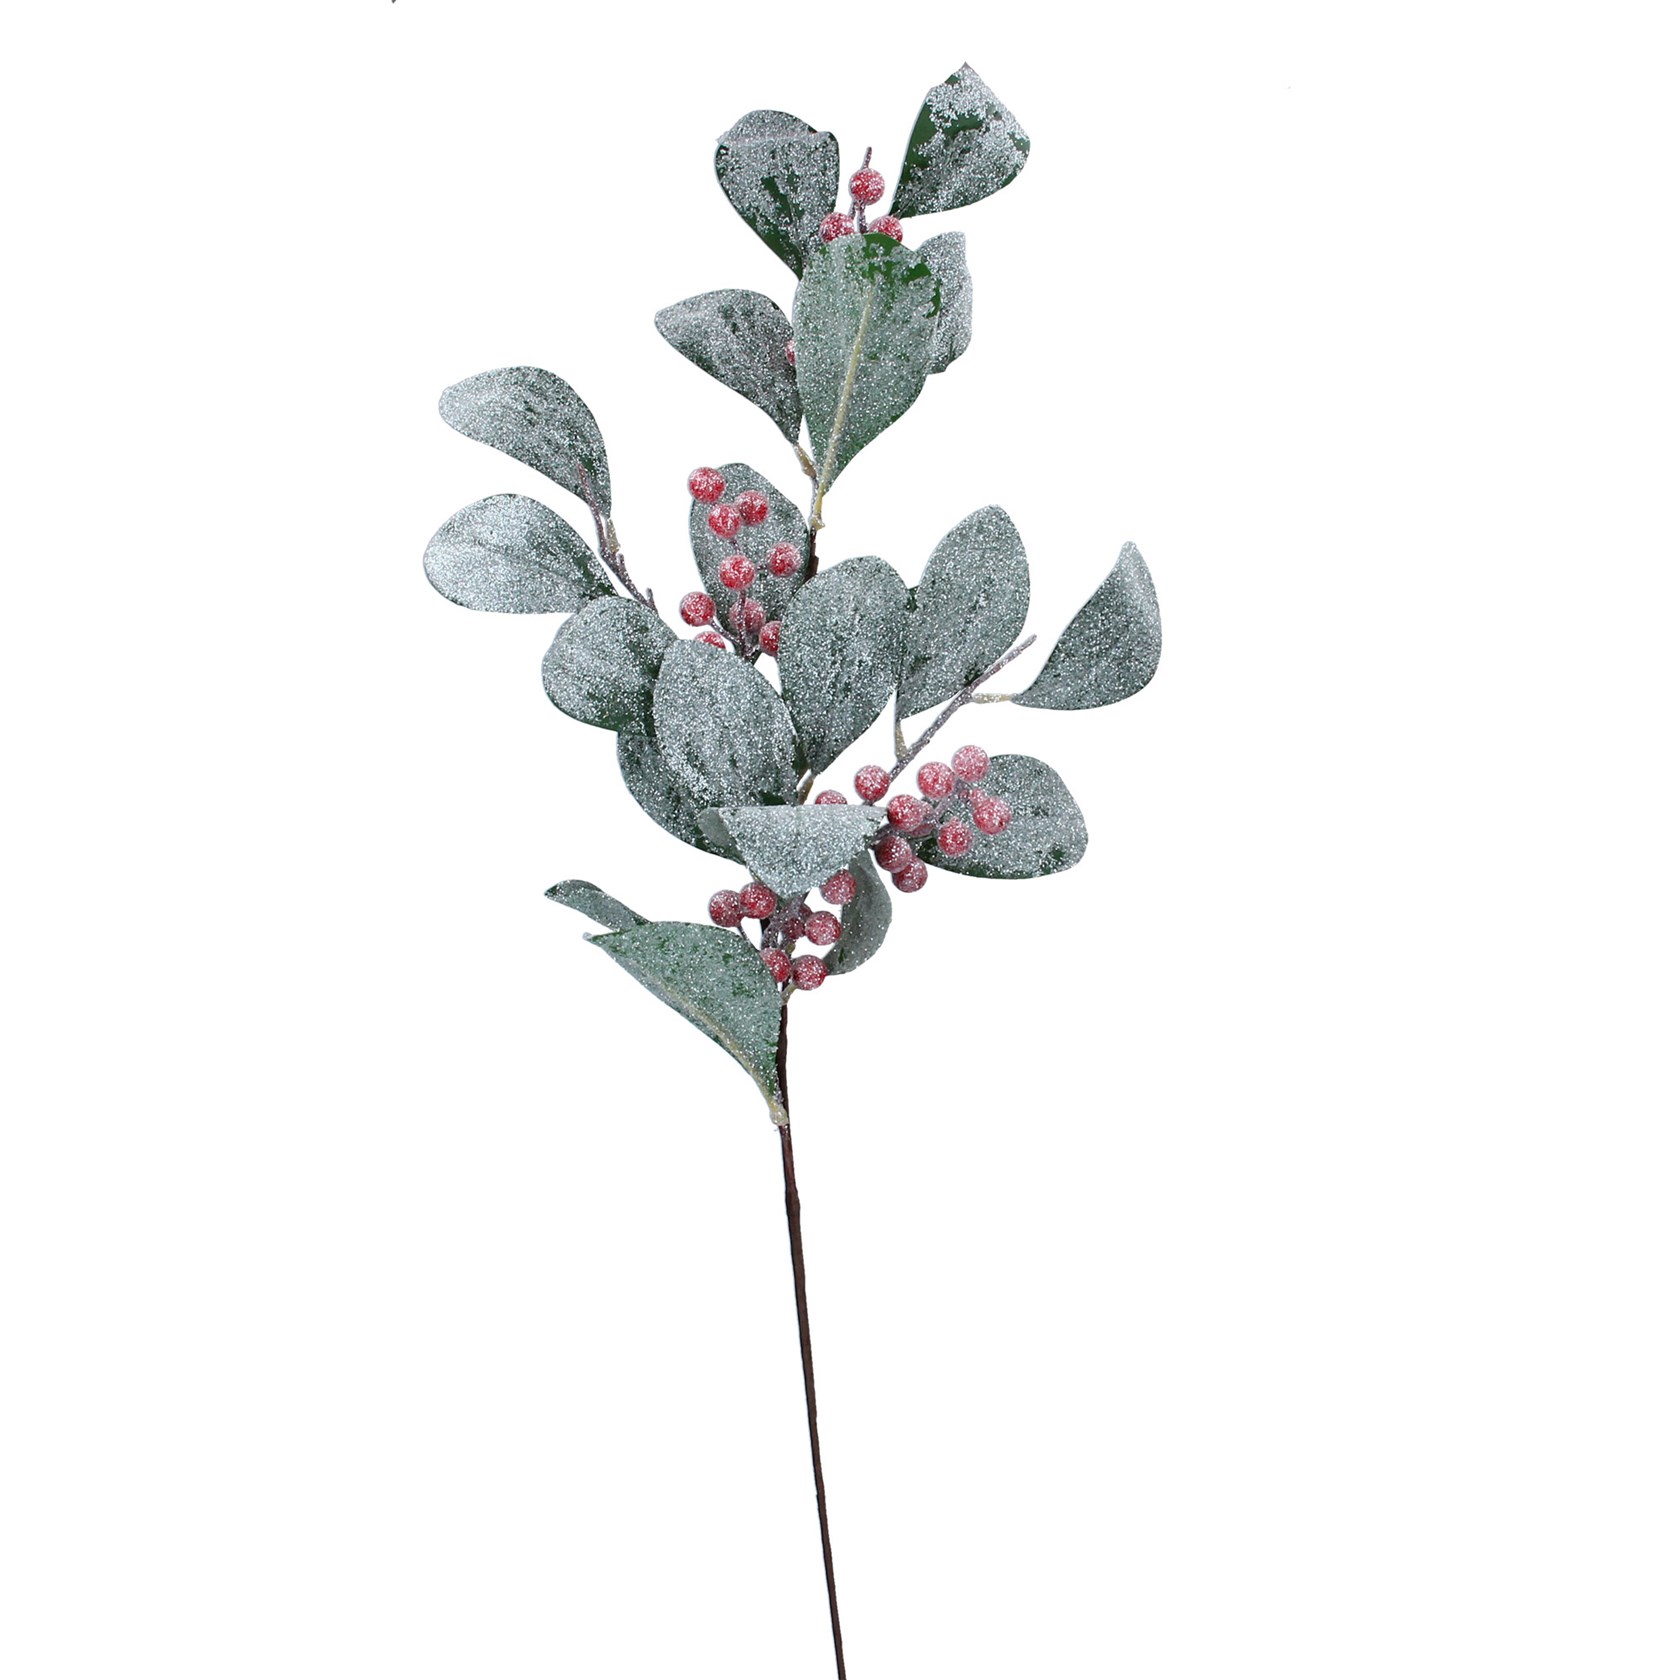 Frosted leaf and red berry Christmas spray. By Gisela Graham. The perfect festive addition to your home.